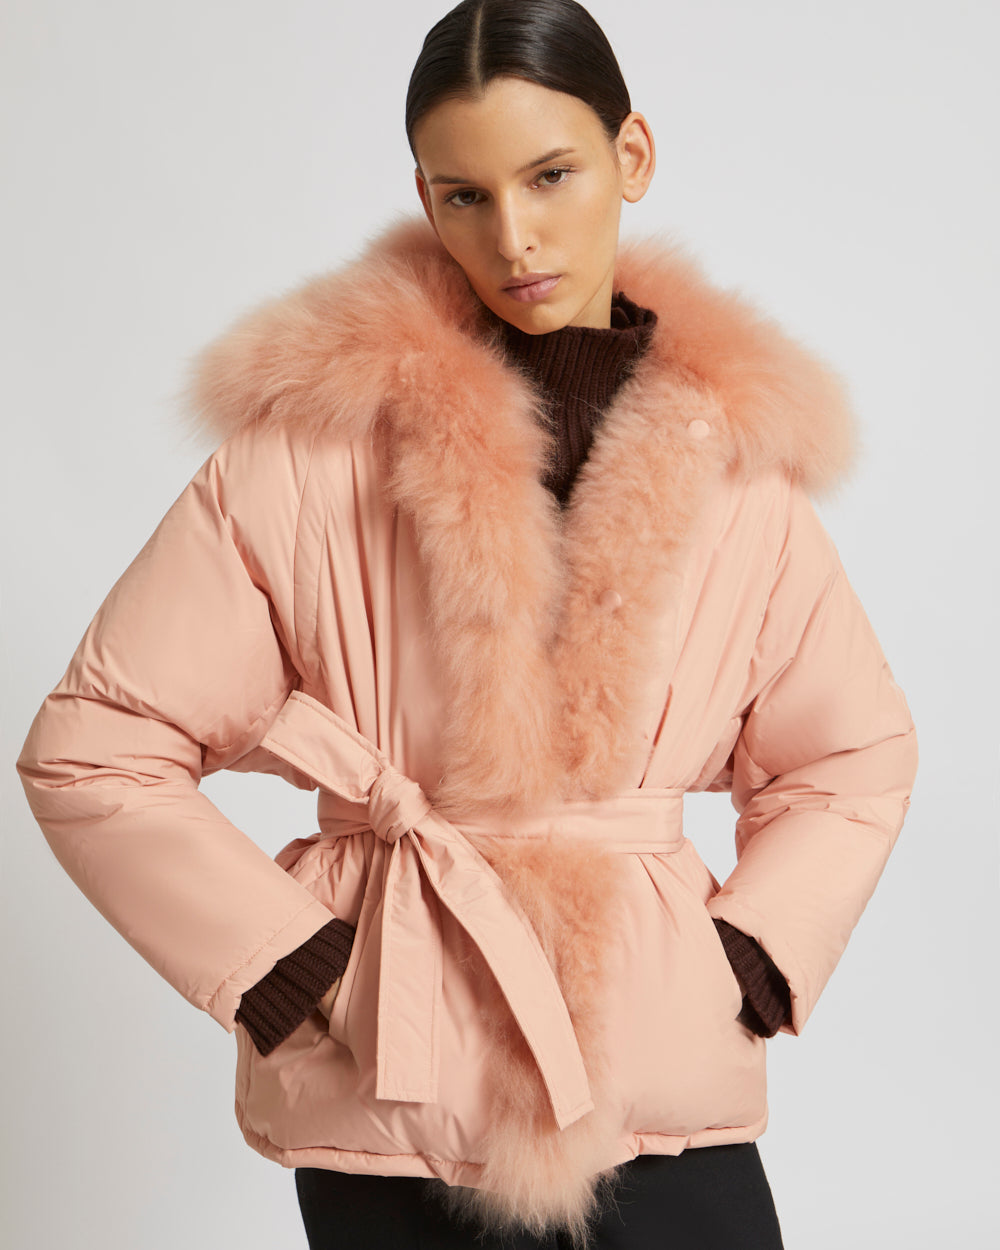 Missguided ski belted jacket with fur hood in pink